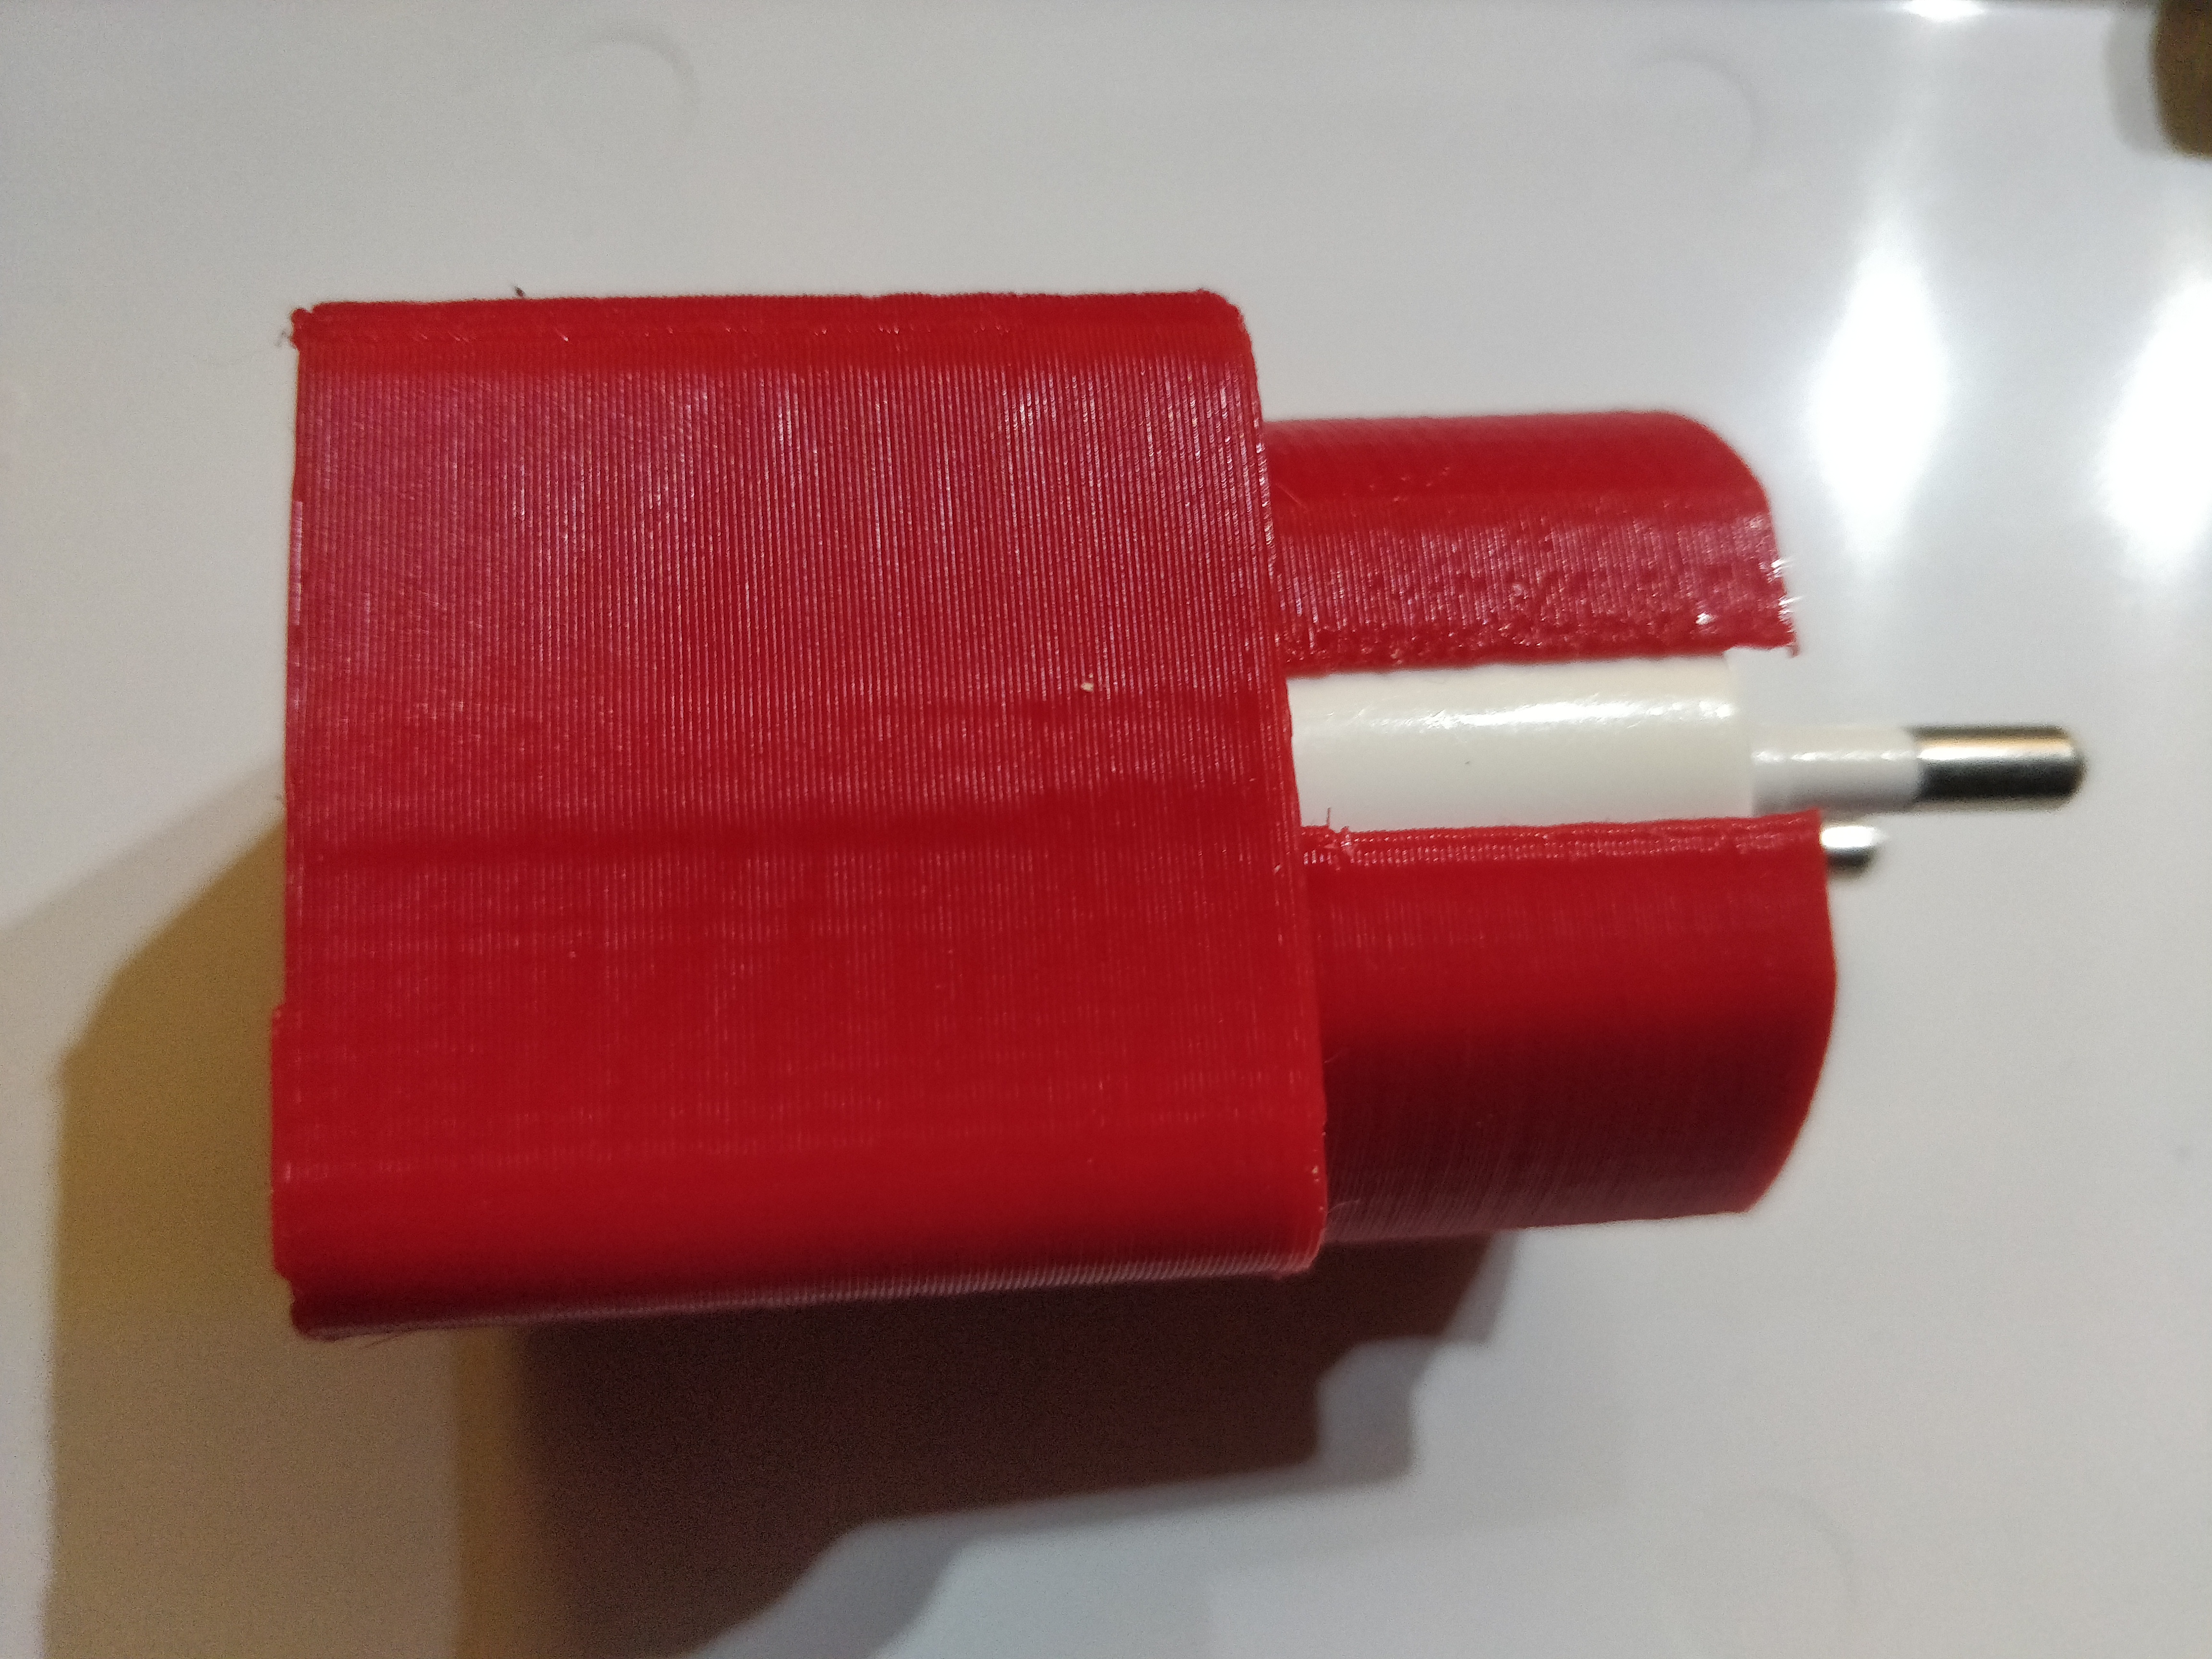 A stabalizing adapter for the Oneplus charger US model to hold the us to eur adapter